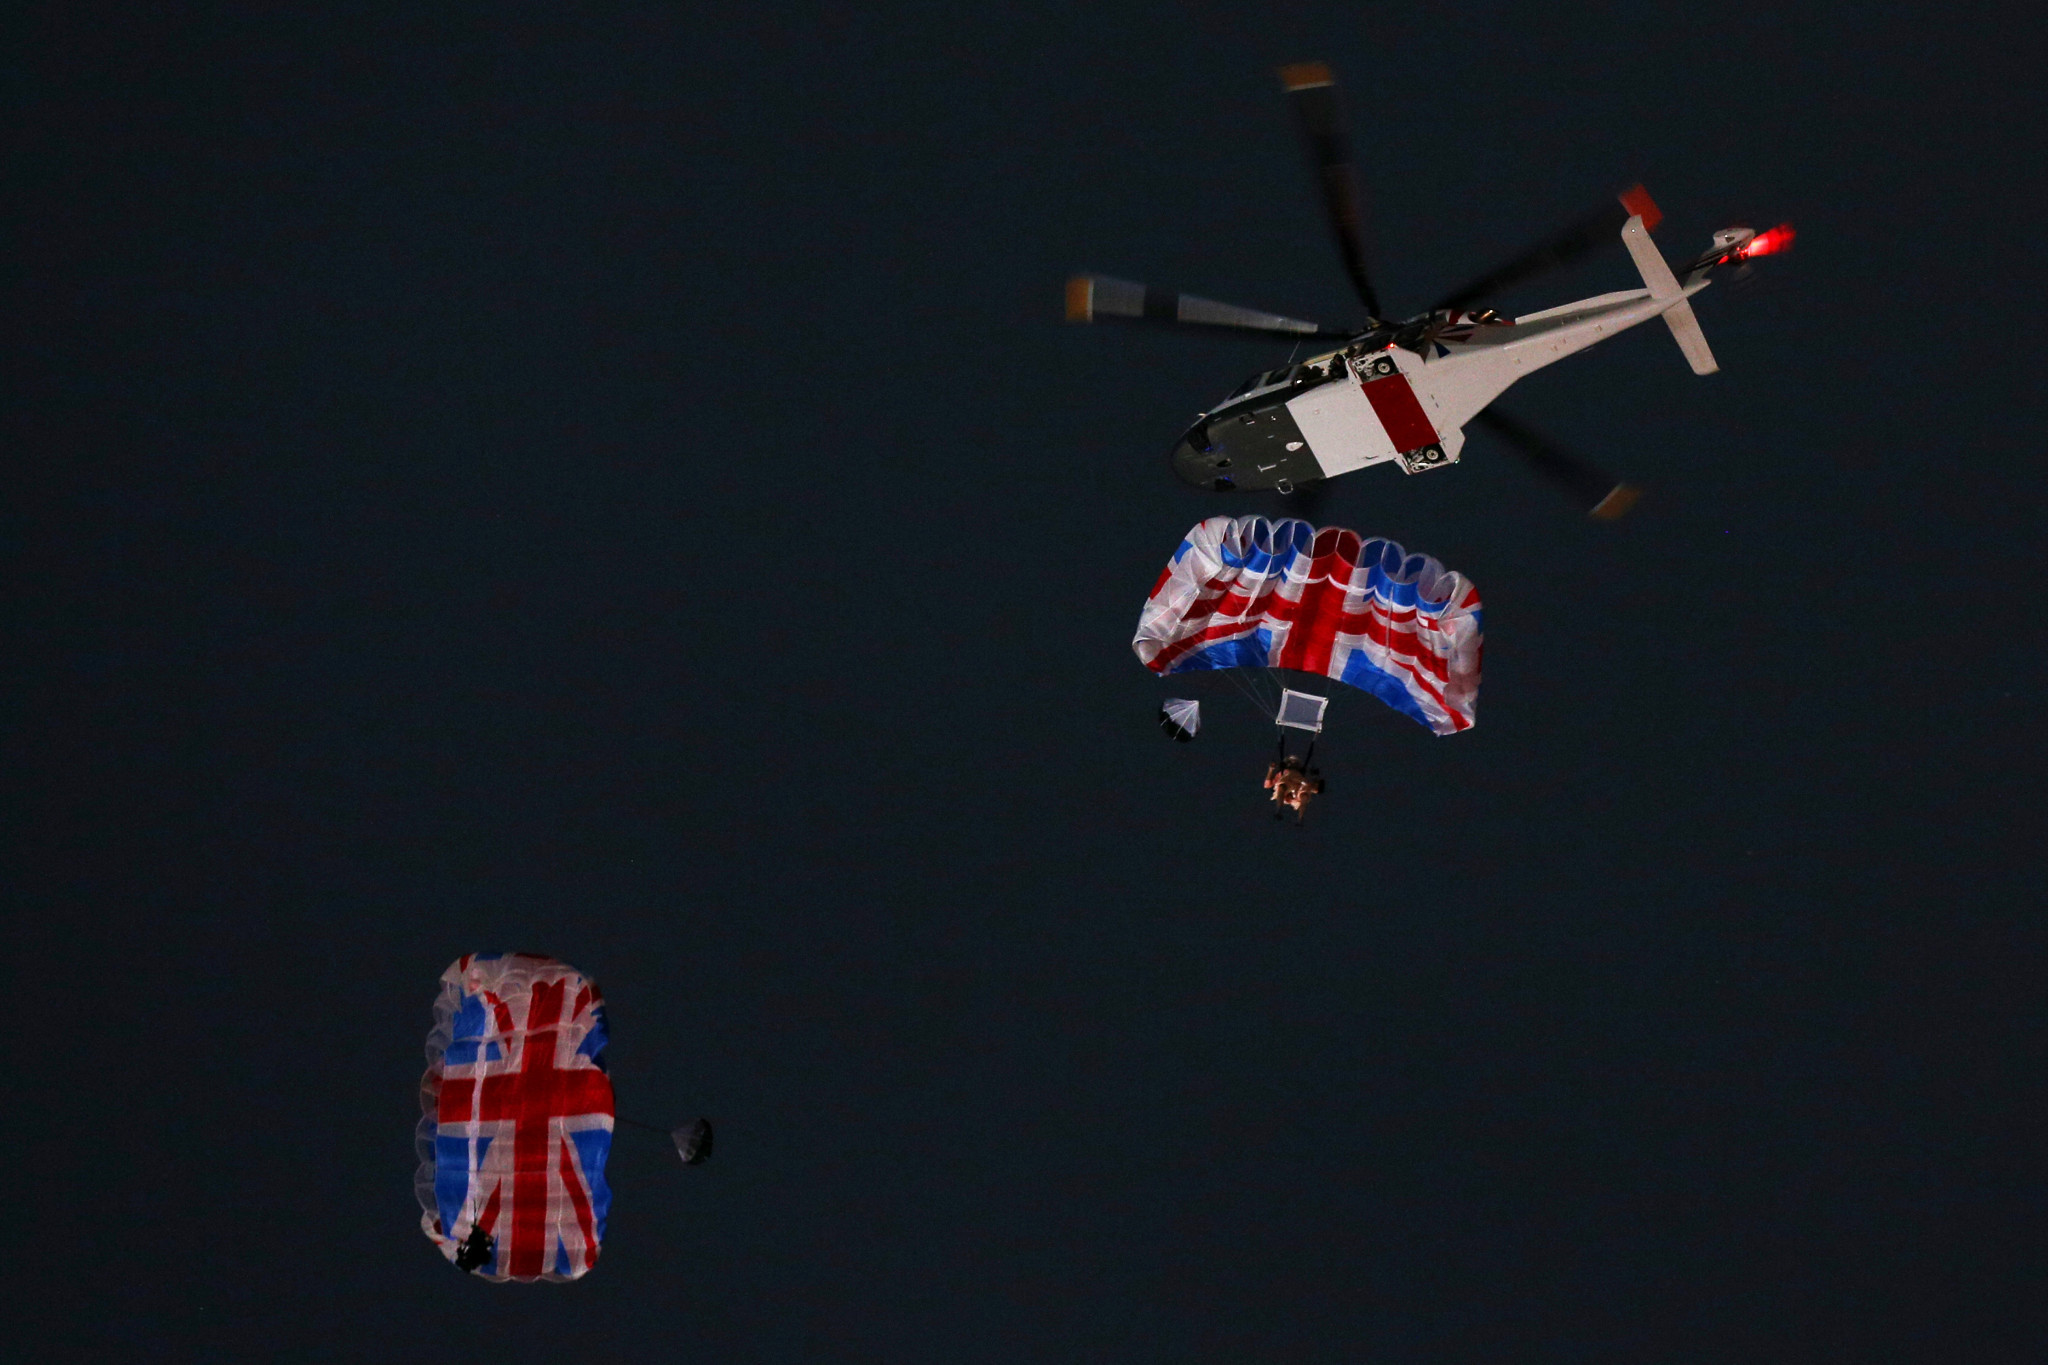 Gary Connery, top, was one of two skydivers who made a descent at the London 2012 Olympic Opening Ceremony for a sketch featuring the Queen ©Getty Images